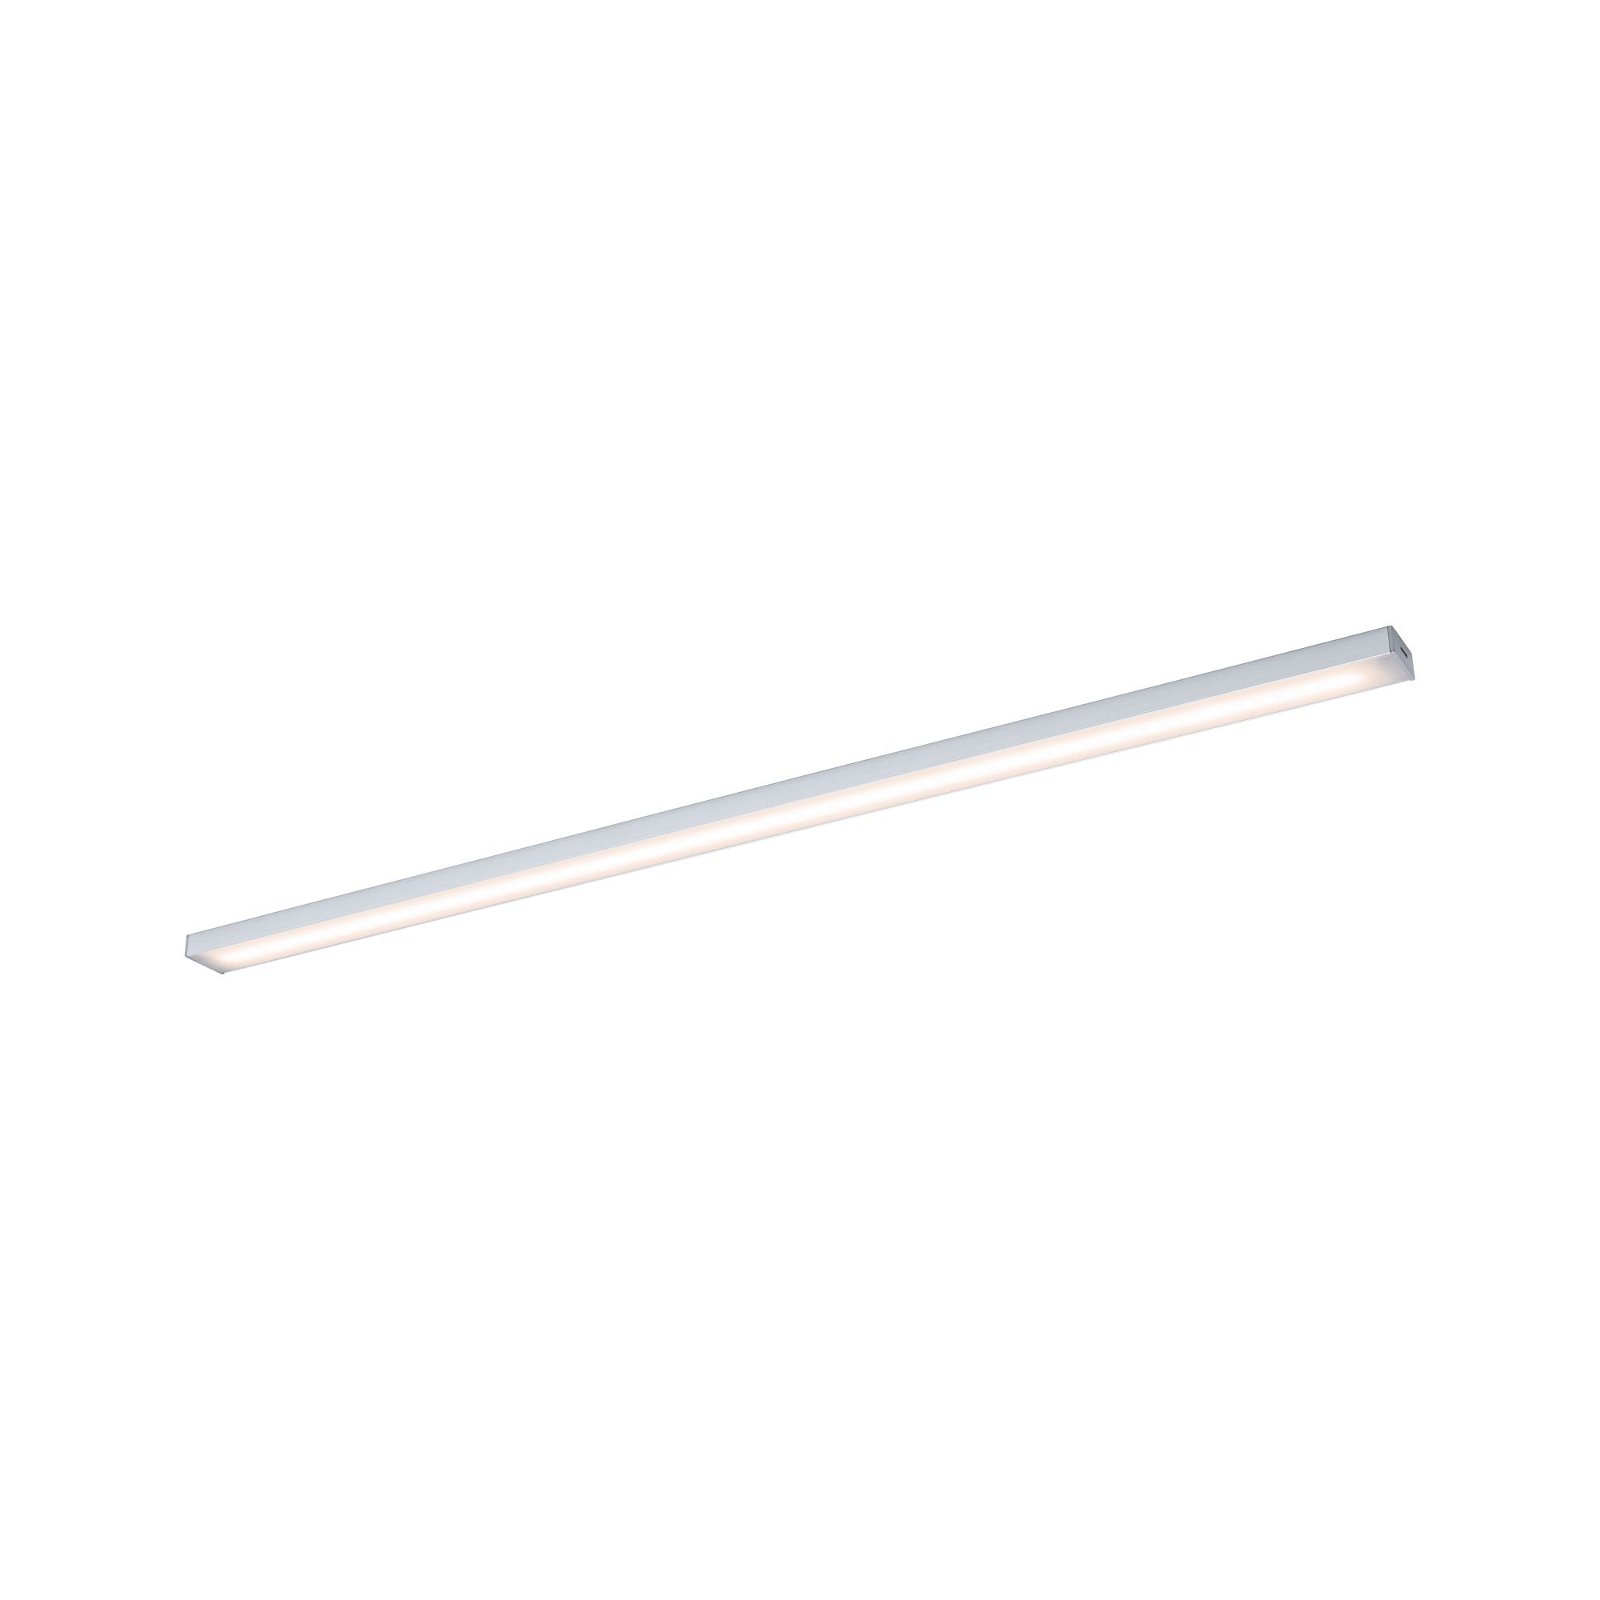 Clever Connect LED Spot Barre Tunable White 6,5W Chrome matt